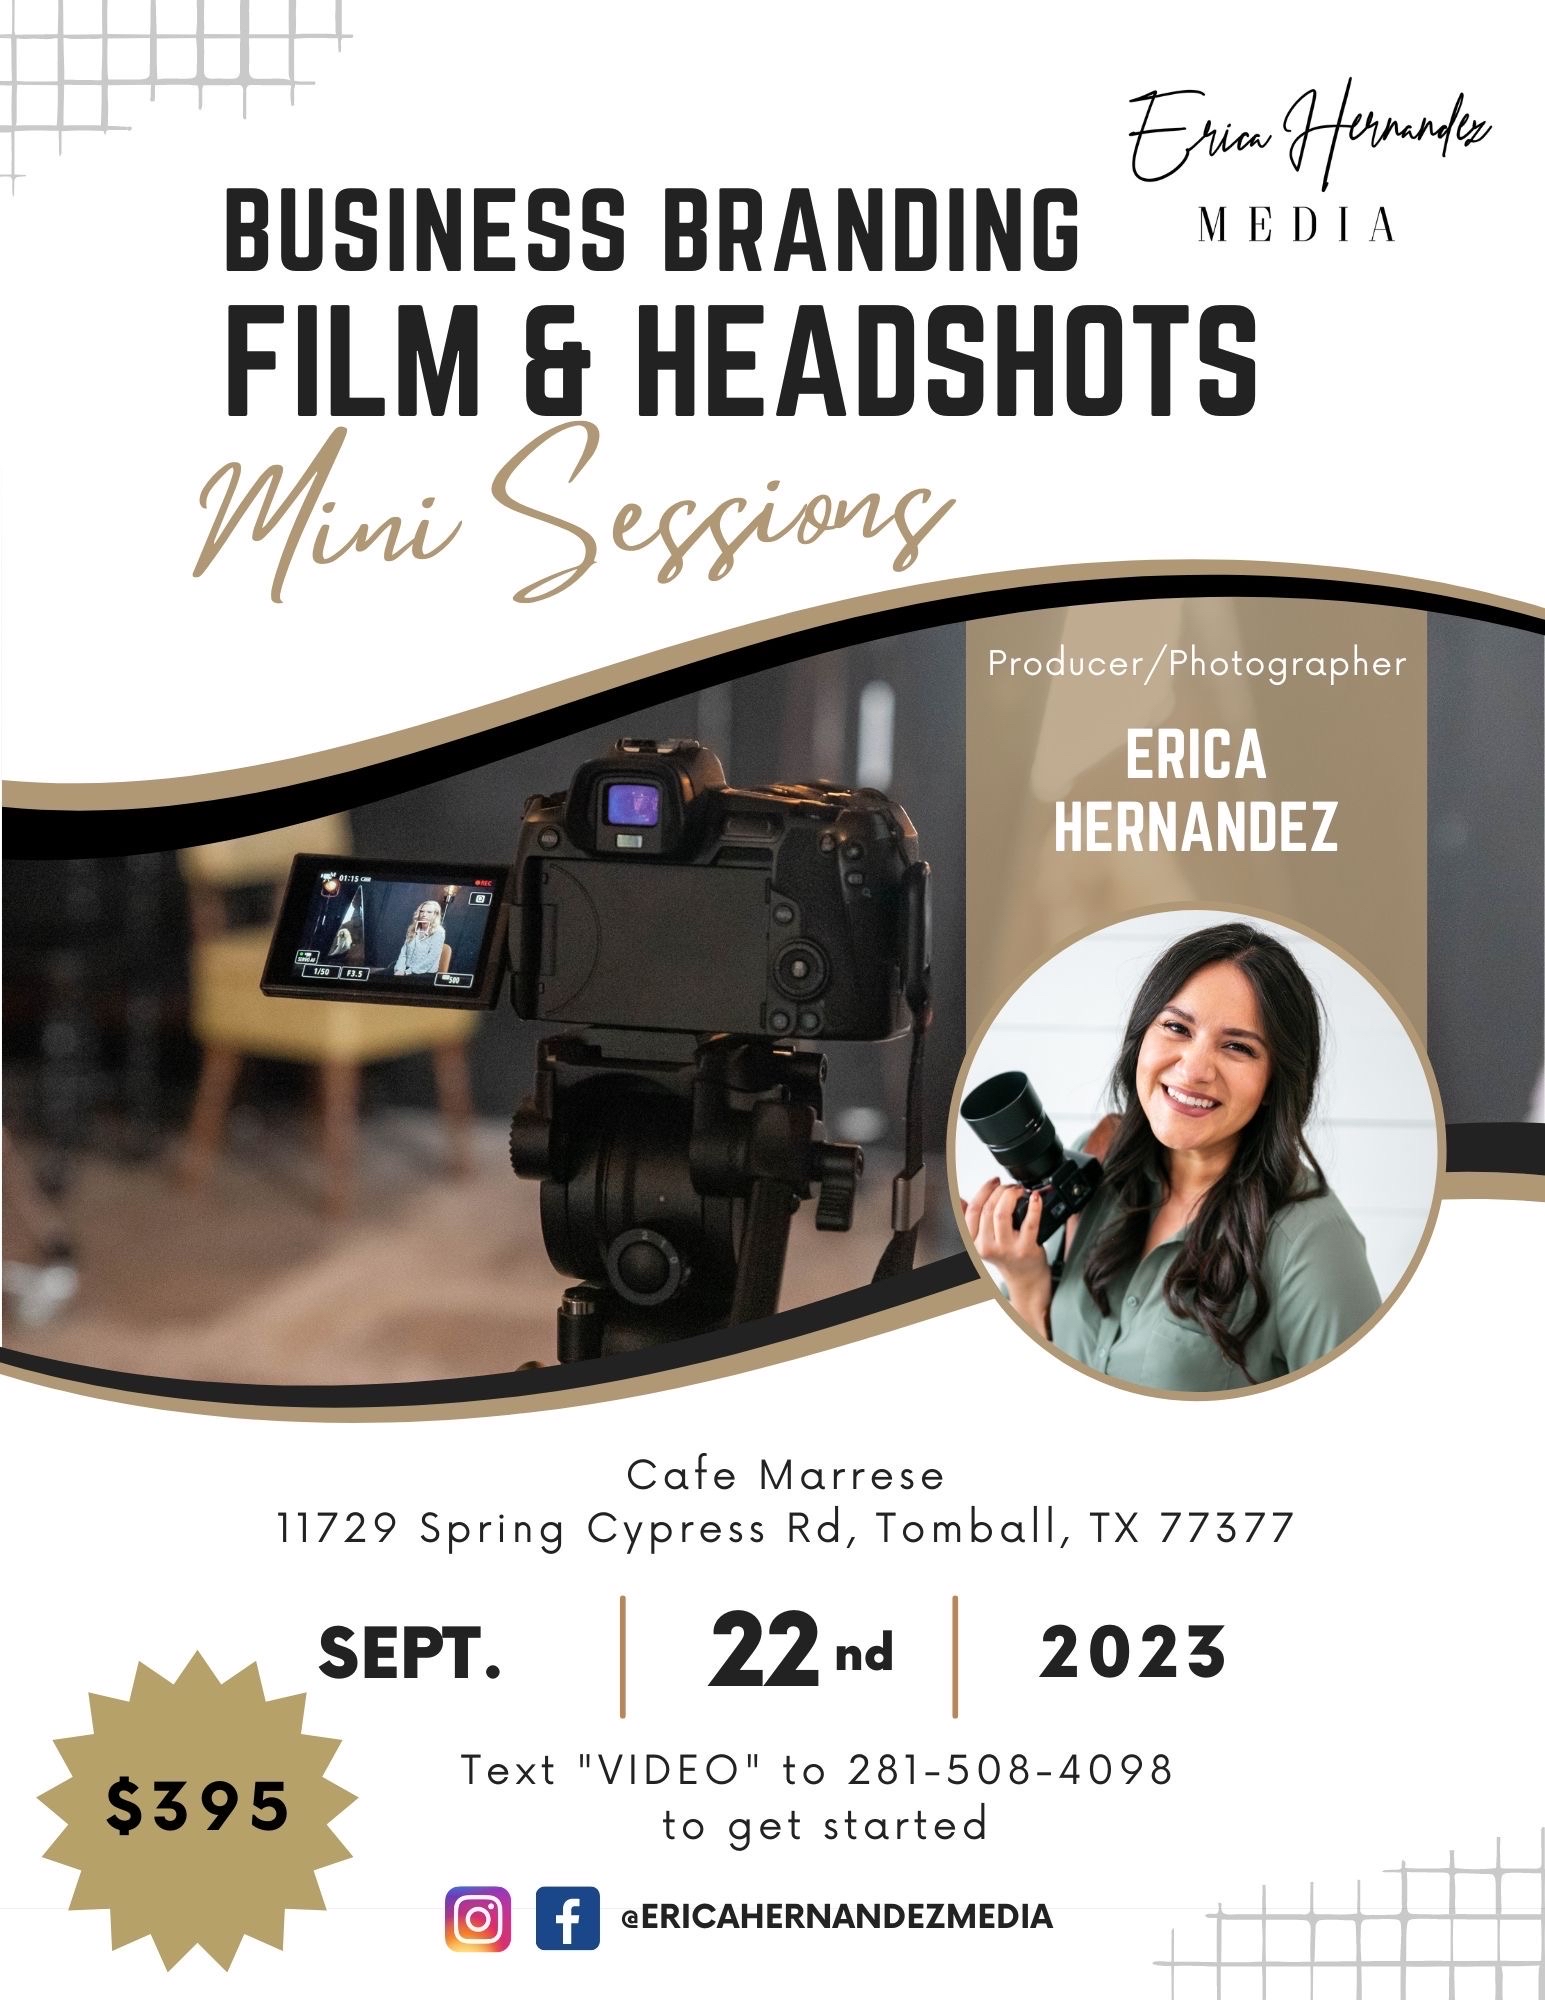 🎥 Hi NIA family ! Wanted to let you know I'm hosting a filming/photography session next month to help you show up online and build trust with your audience. We'll film your commercial and also capture 2 headshots to use for your video thumbnails. Here are the details—>>ONLY 6 SPACES AVAILABLE 🎥 Filming + Headshot mini session📆Friday, September 22nd, 2023📍11729 Spring Cypress Rd, Tomball, TX 77377 | Cafe Marrese 👉 $100 to book | $395 total investment  🔗More info & booking info  ---> https://book.usesession.com/s/_F0nNAQ13 